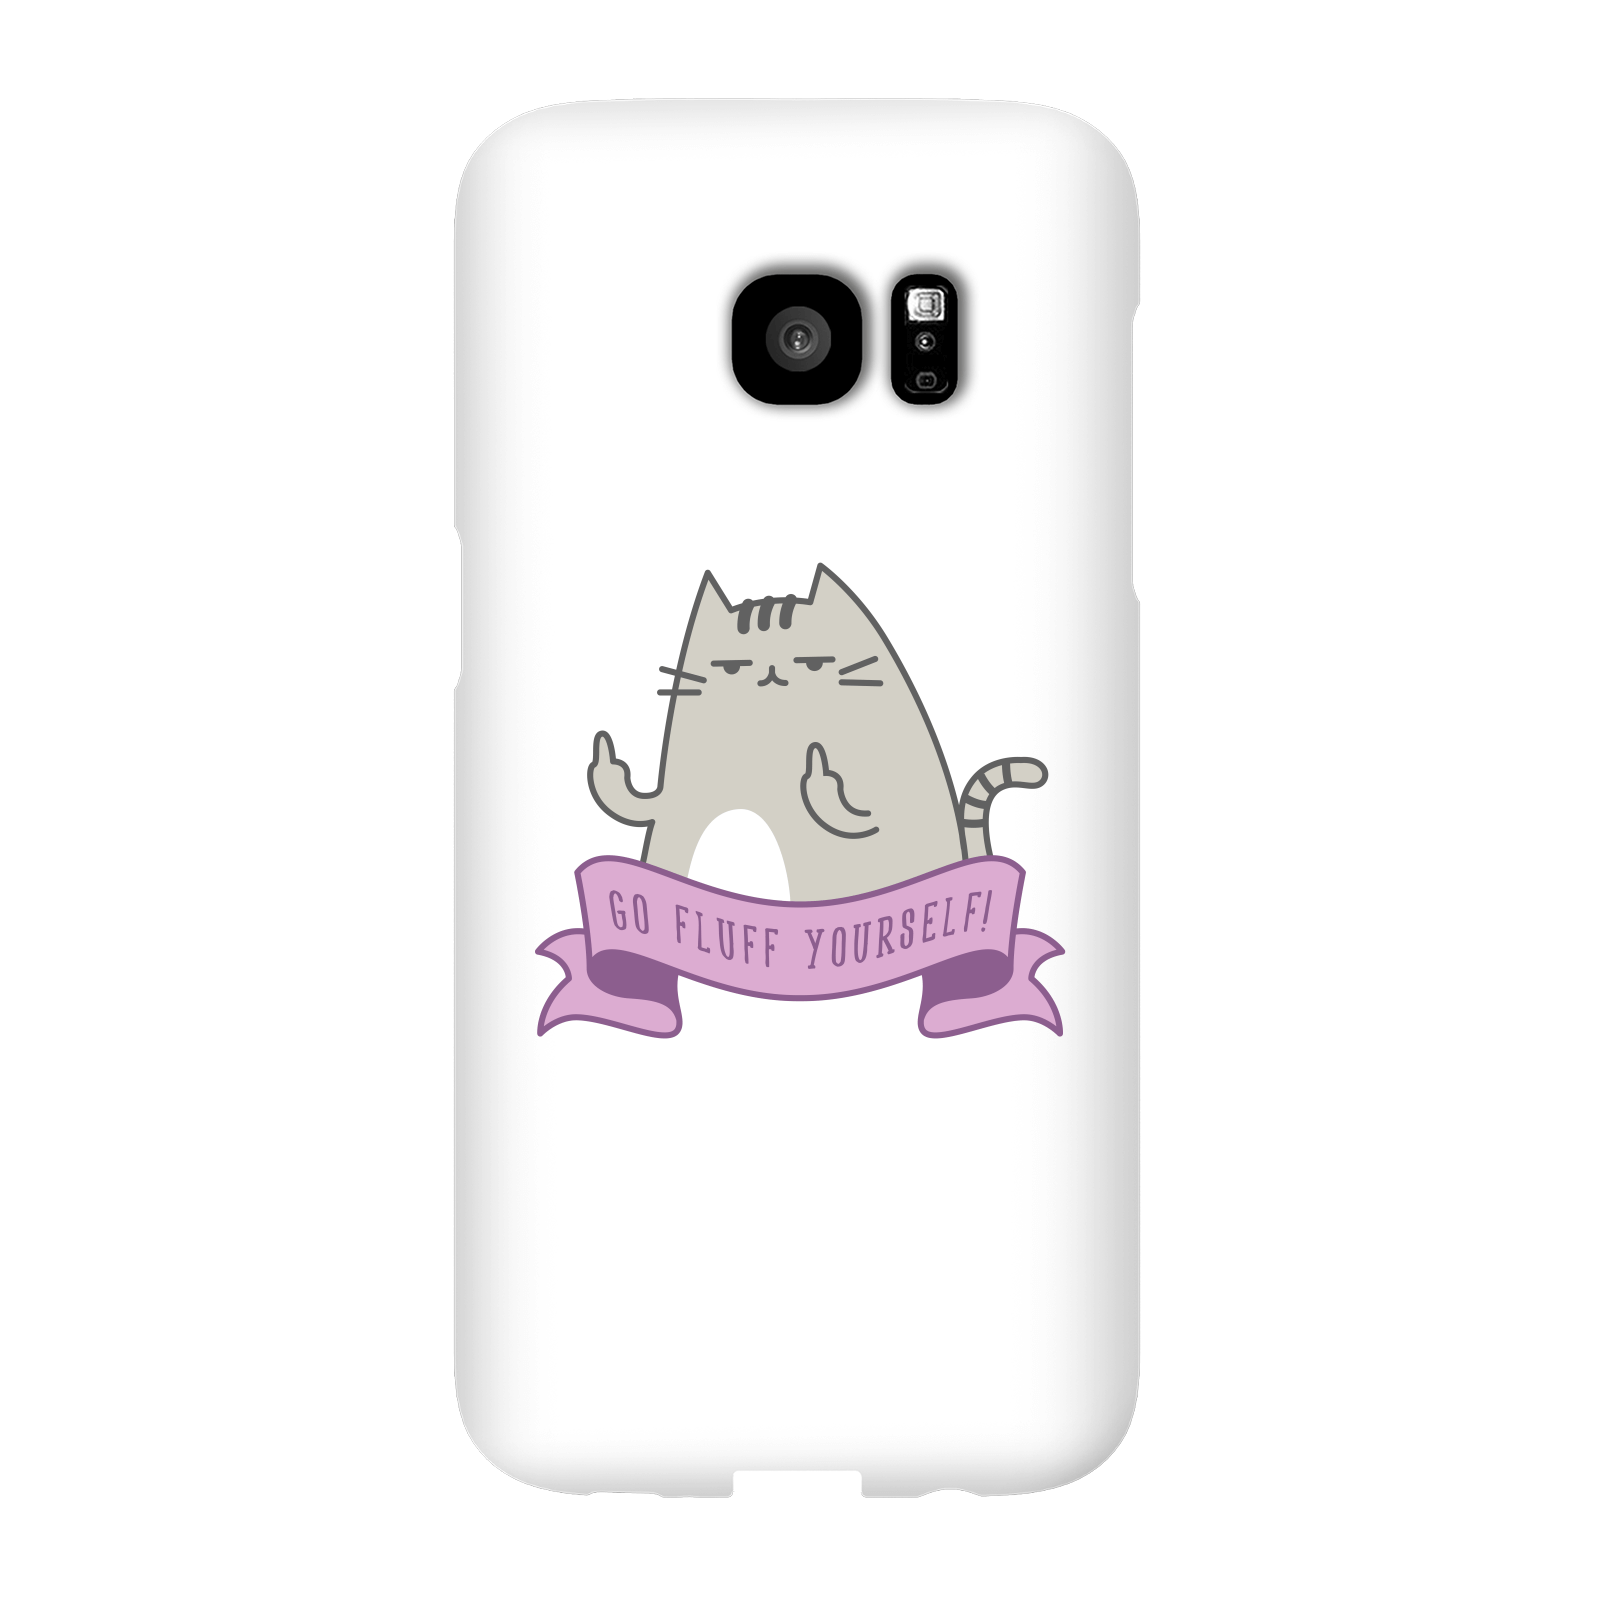 Go Fluff Yourself! Phone Case for iPhone and Android - Samsung S7 Edge - Snap Case - Matte